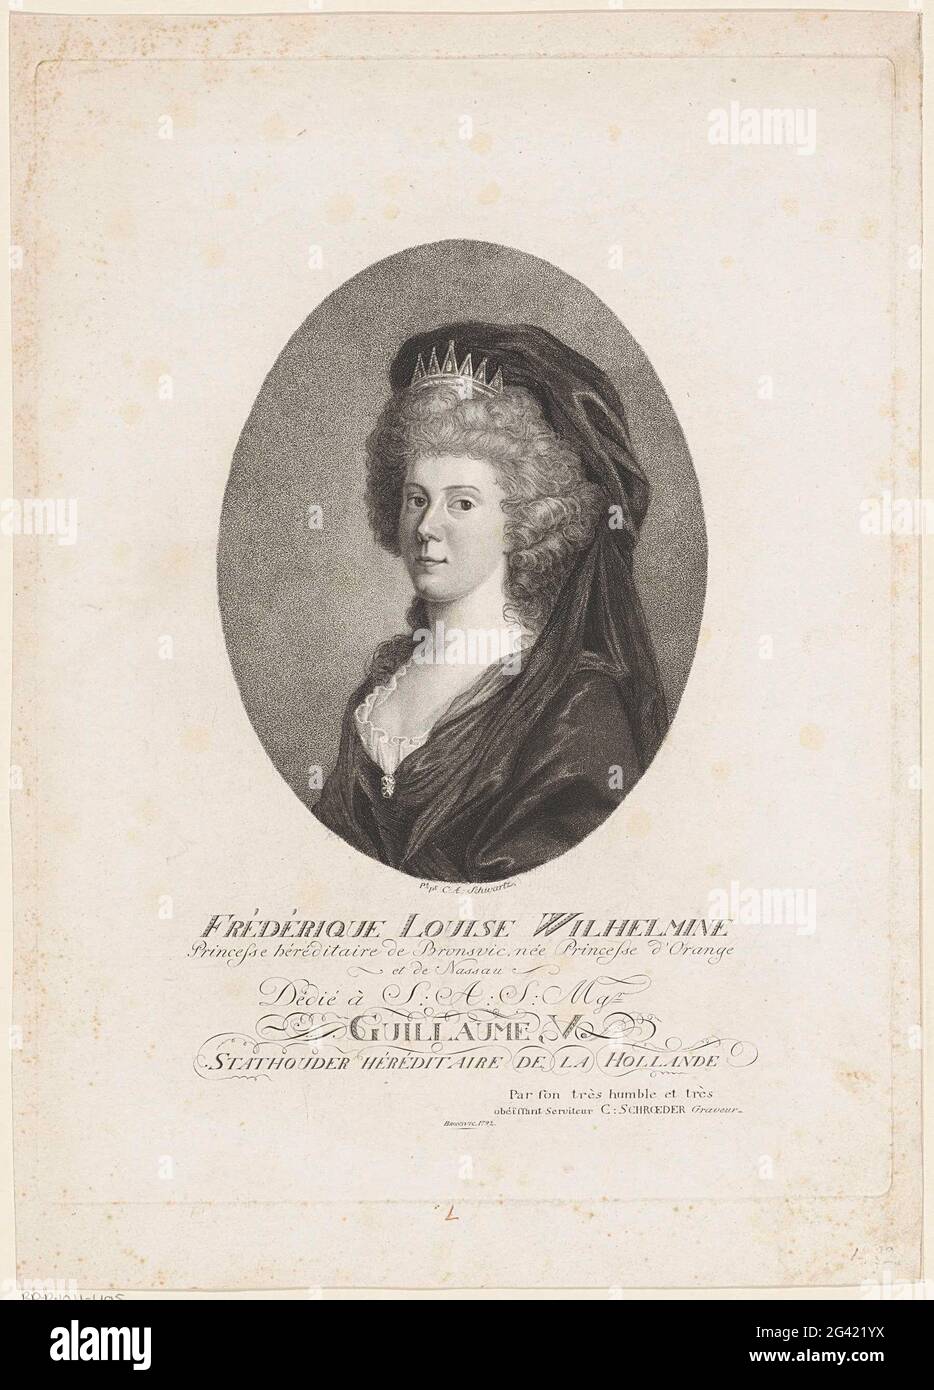 Portrait of Louise, Princess of Orange-Nassau. Portrait of louise in an oval. In the undermaster her name and titles. Stock Photo